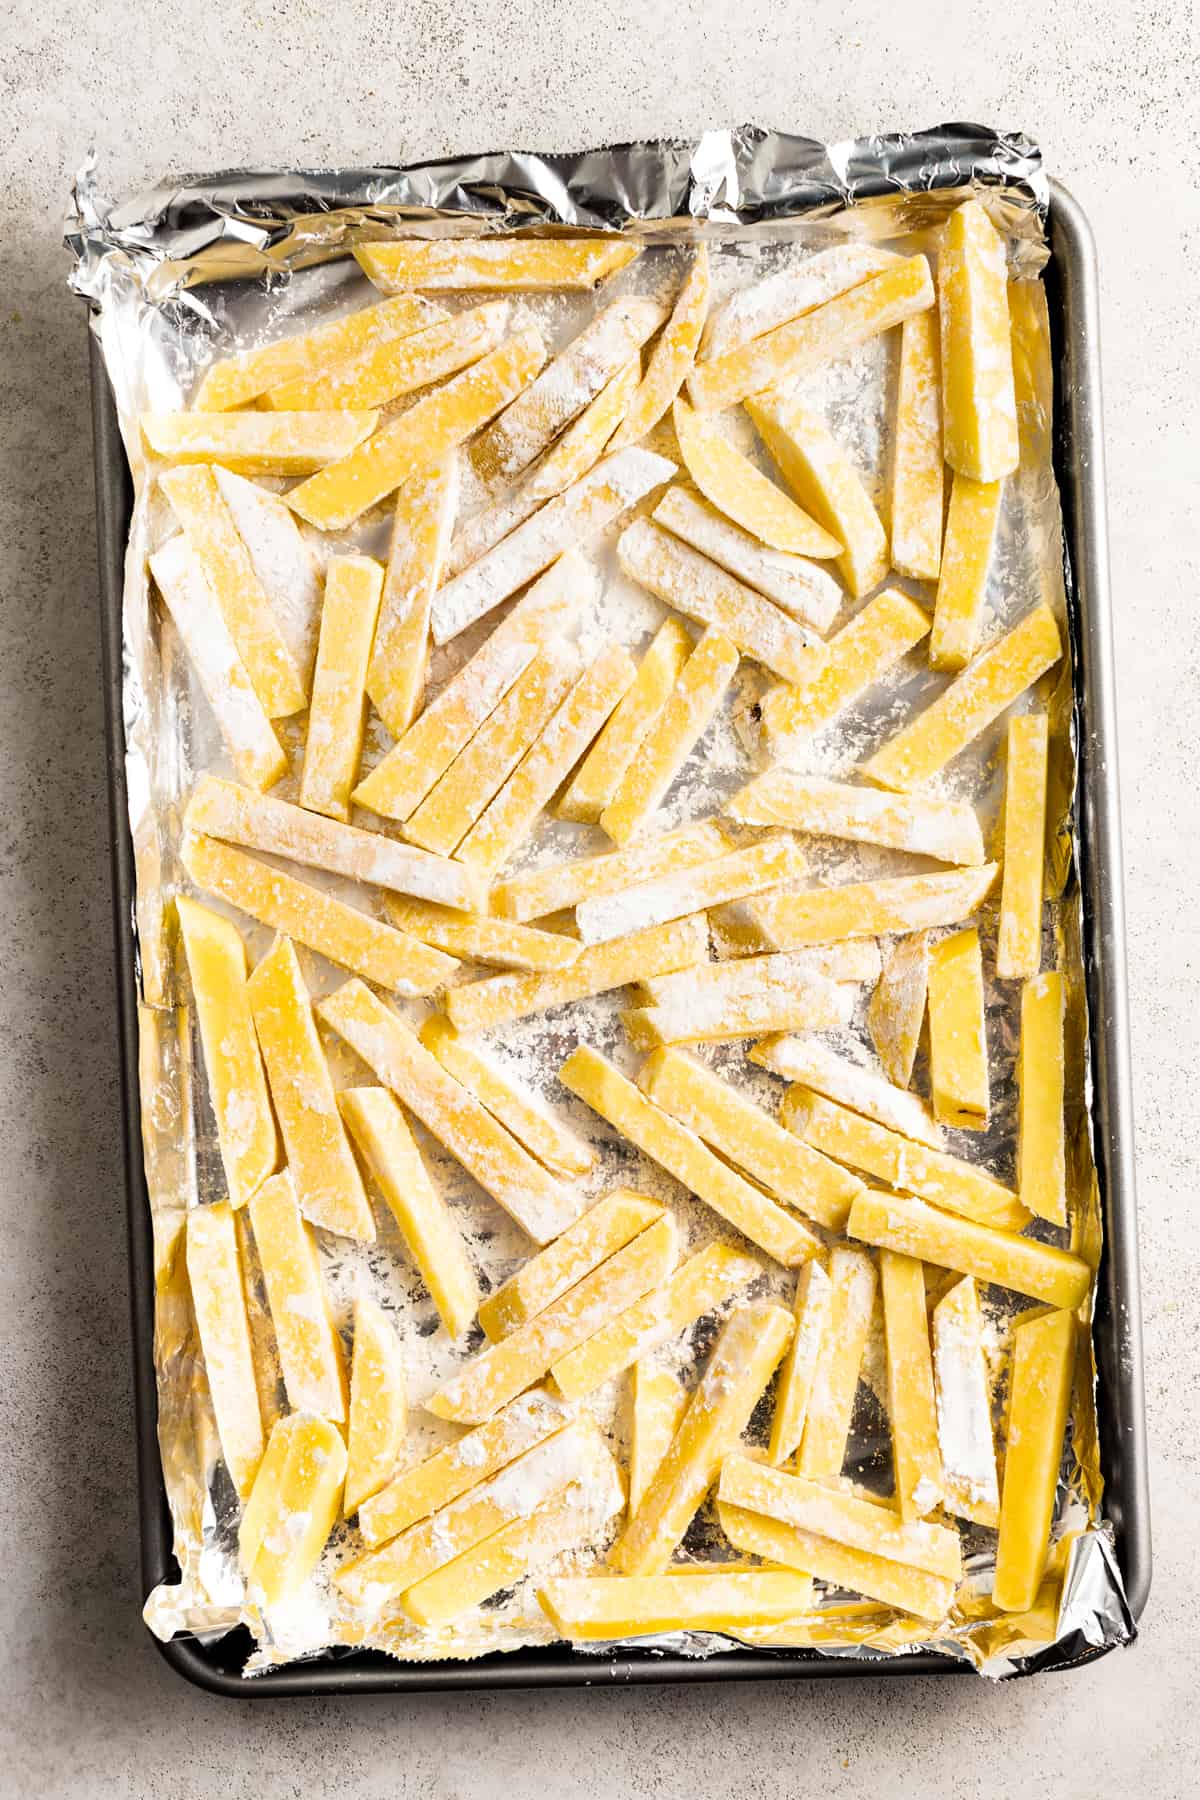 Potatoes are cut into fries and arranged on a baking sheet.